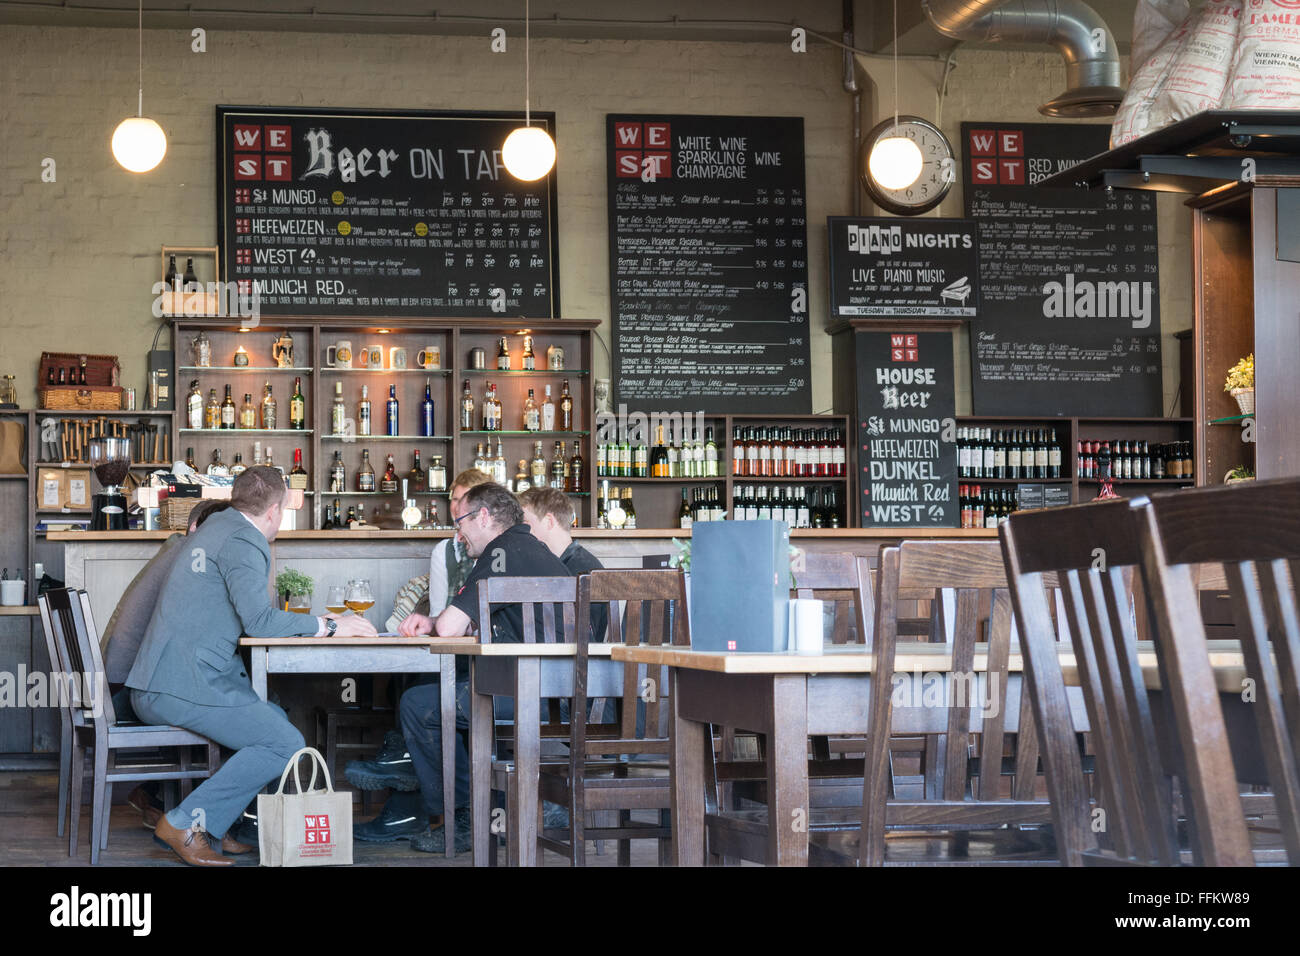 The WEST independent brewery, bar and restaurant interior - Glasgow,  Scotland, UK Stock Photo